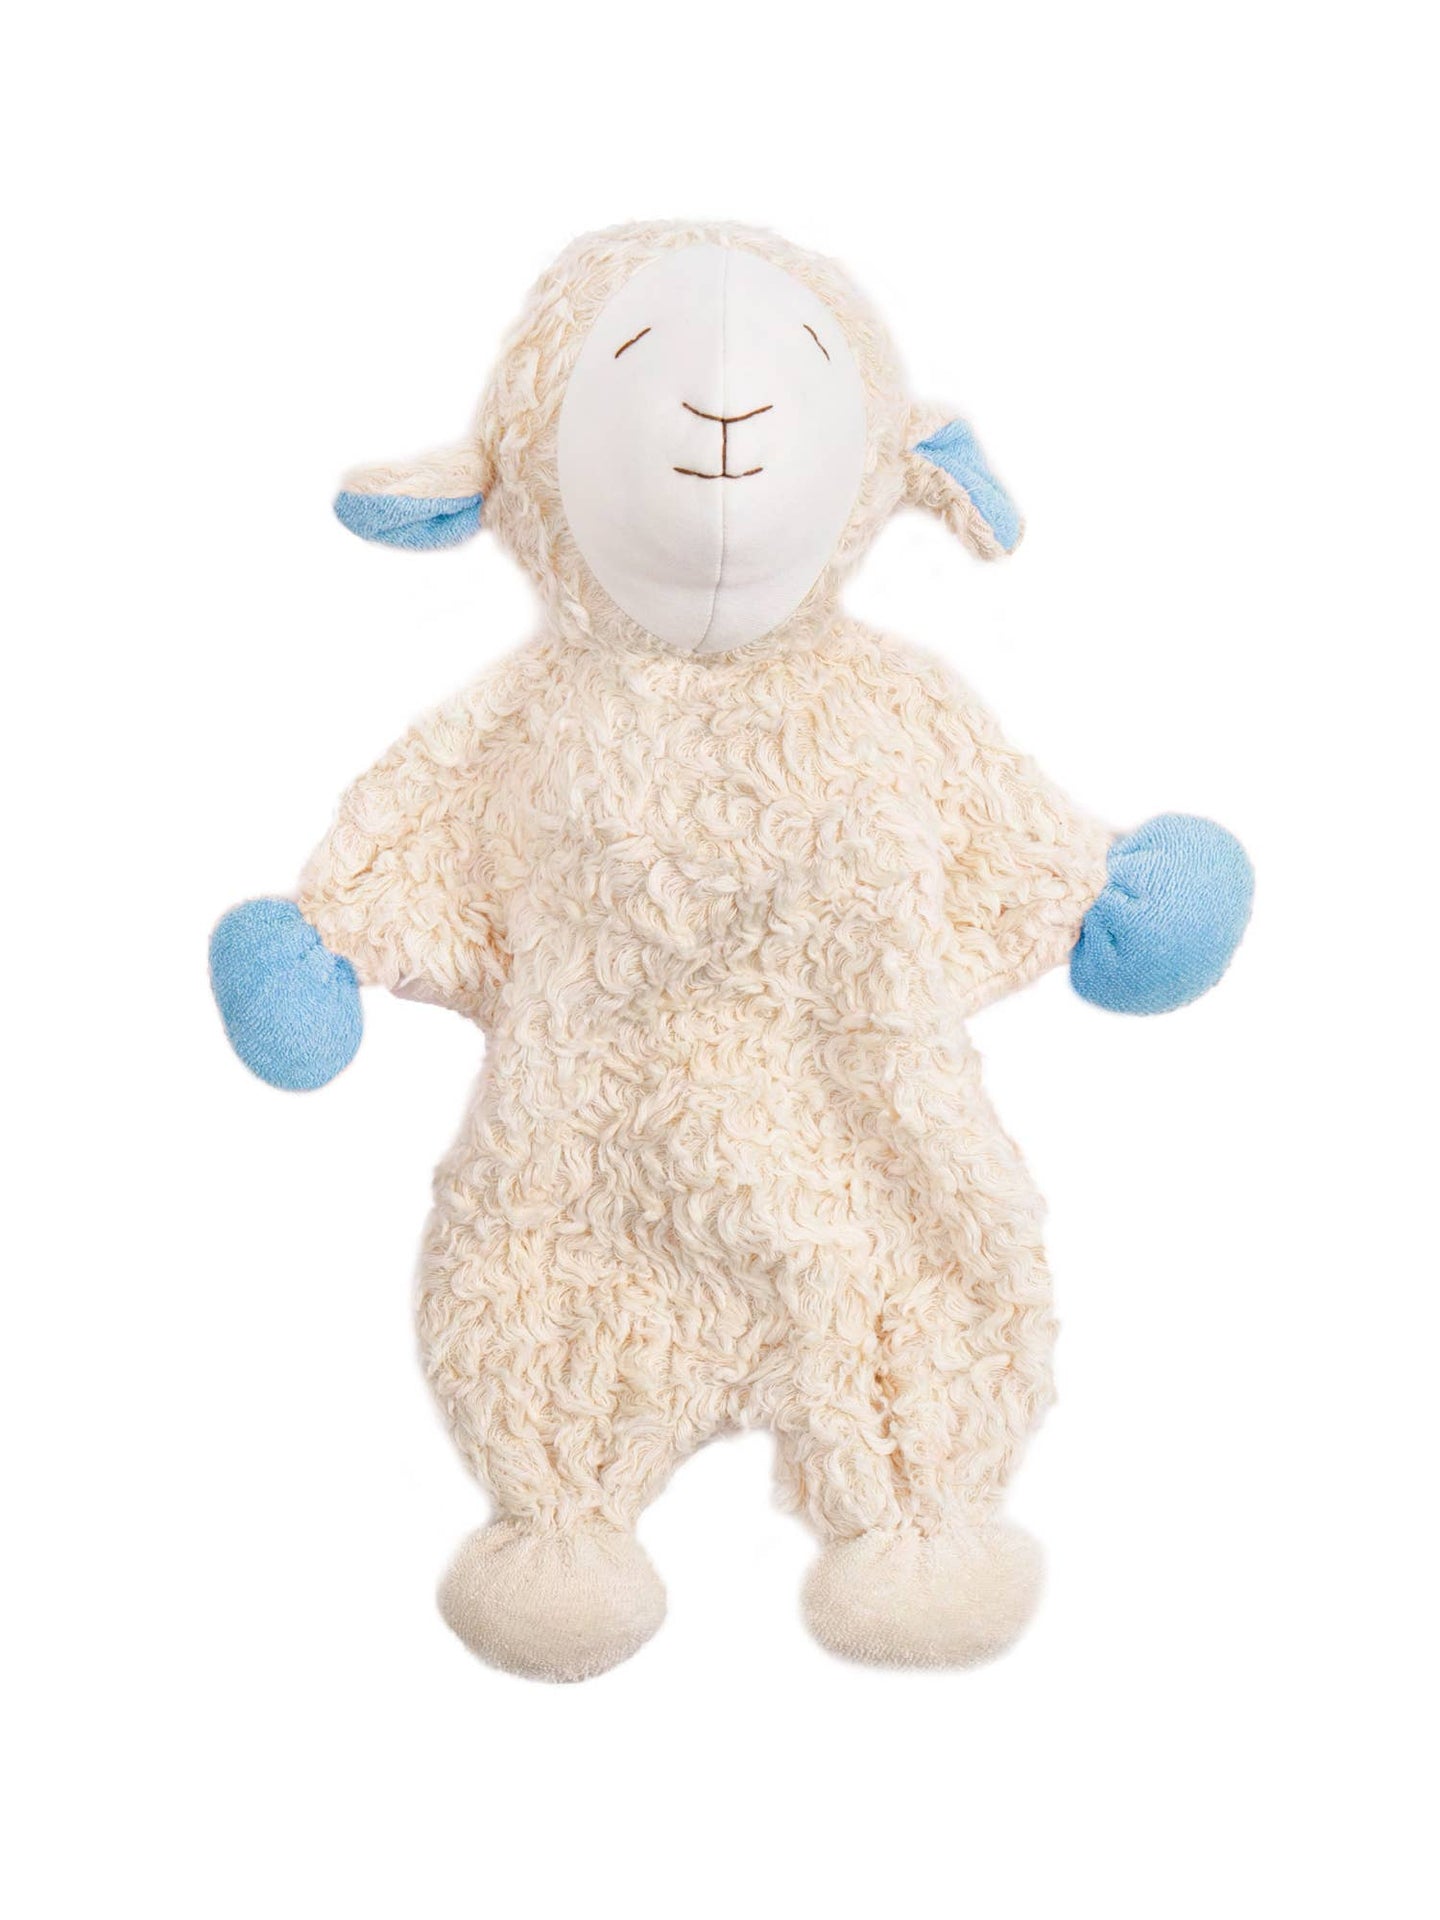 Under the Nile - Snuggle Sheep Toy - Blue Ears